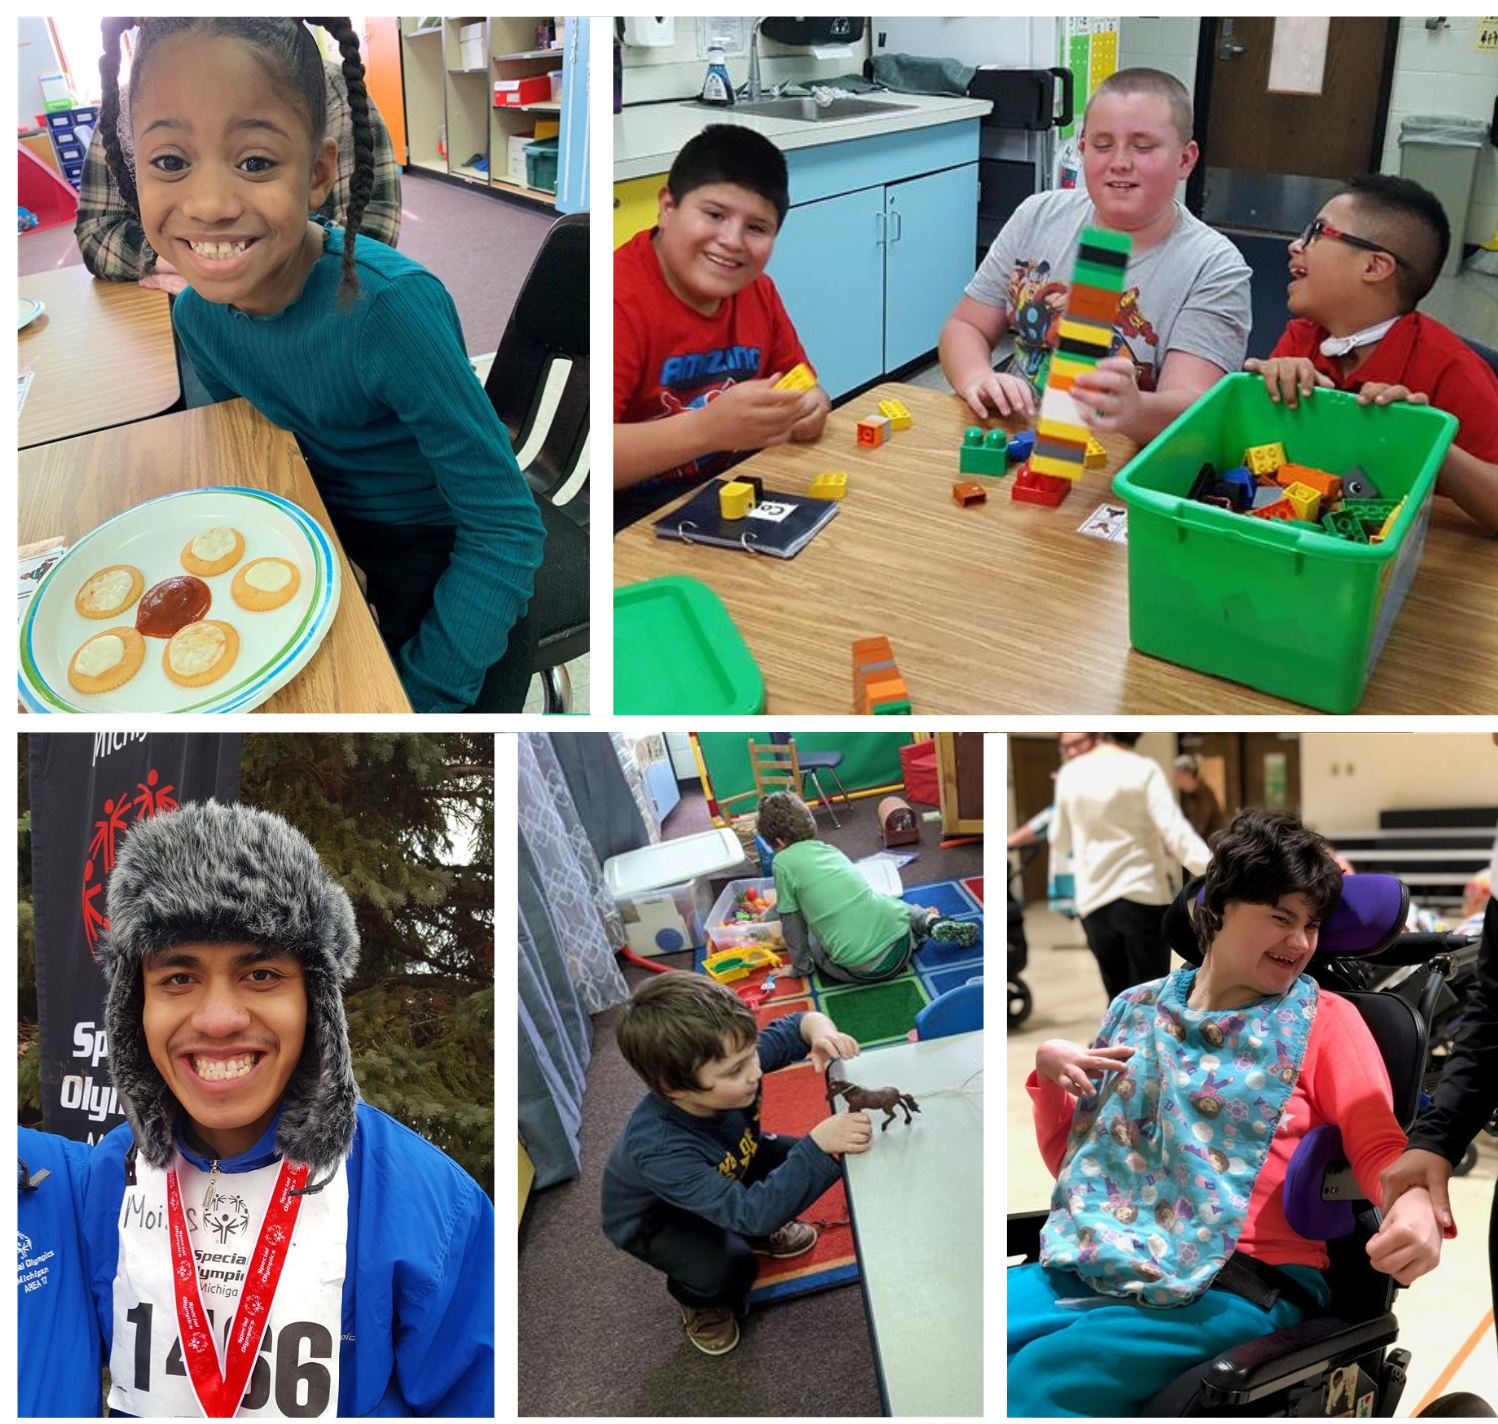 Photo collage with a girl smiling, students working with Legos, a student smiling with a ribbon, a student with a toy horse, and a student smiling.